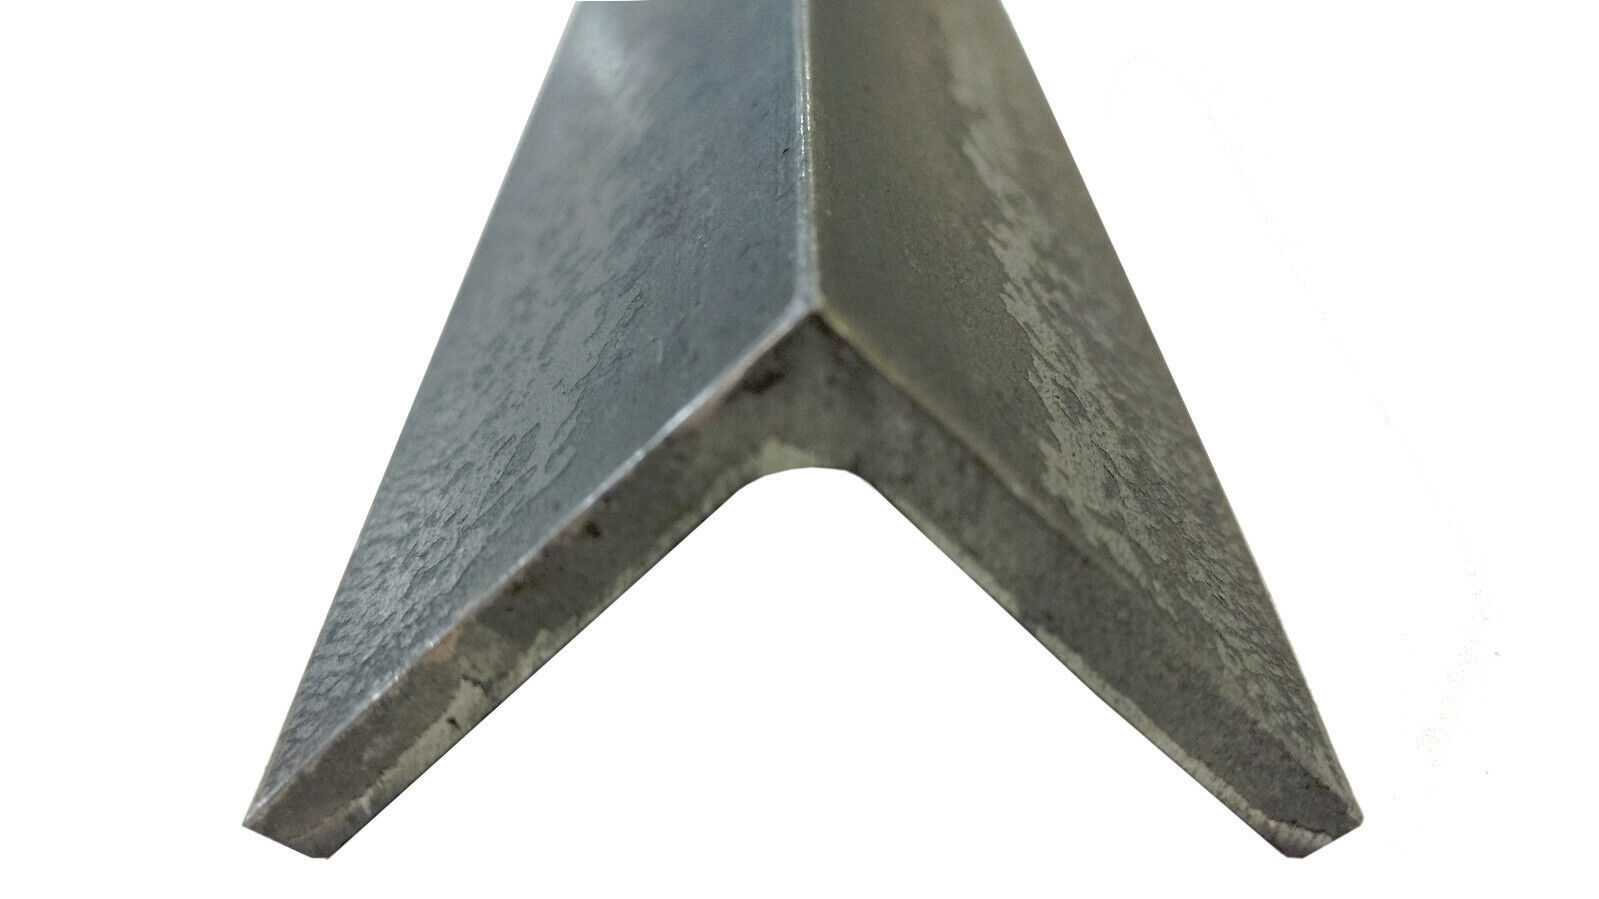 Primary image for 1 Pc of 2in x 2in x 1/8in (11 Gauge) Steel Angle Iron 48in Piece